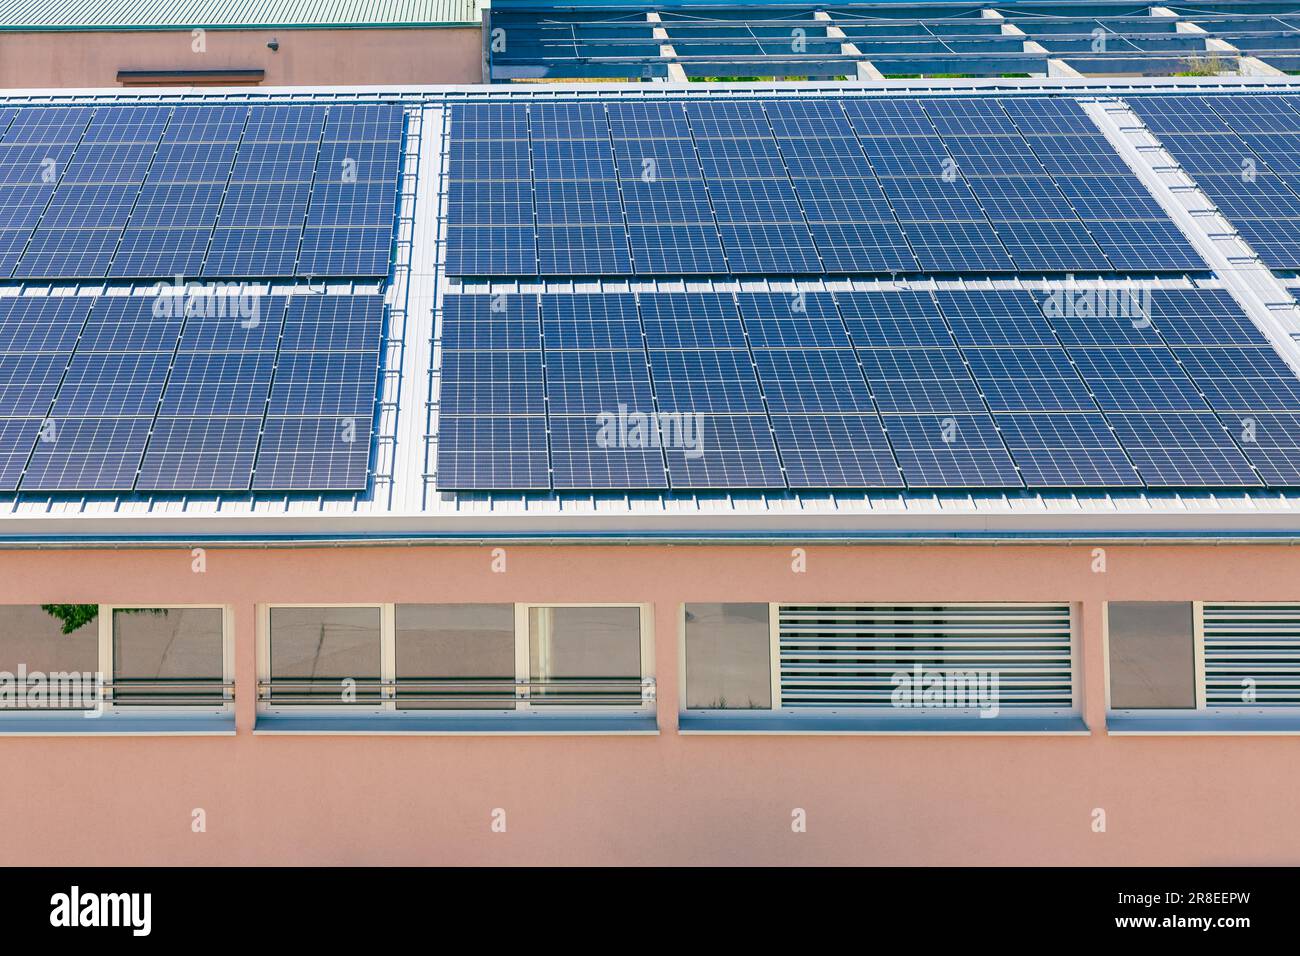 Solar panels installed on a roof of a large industrial building or a warehouse. Stock Photo